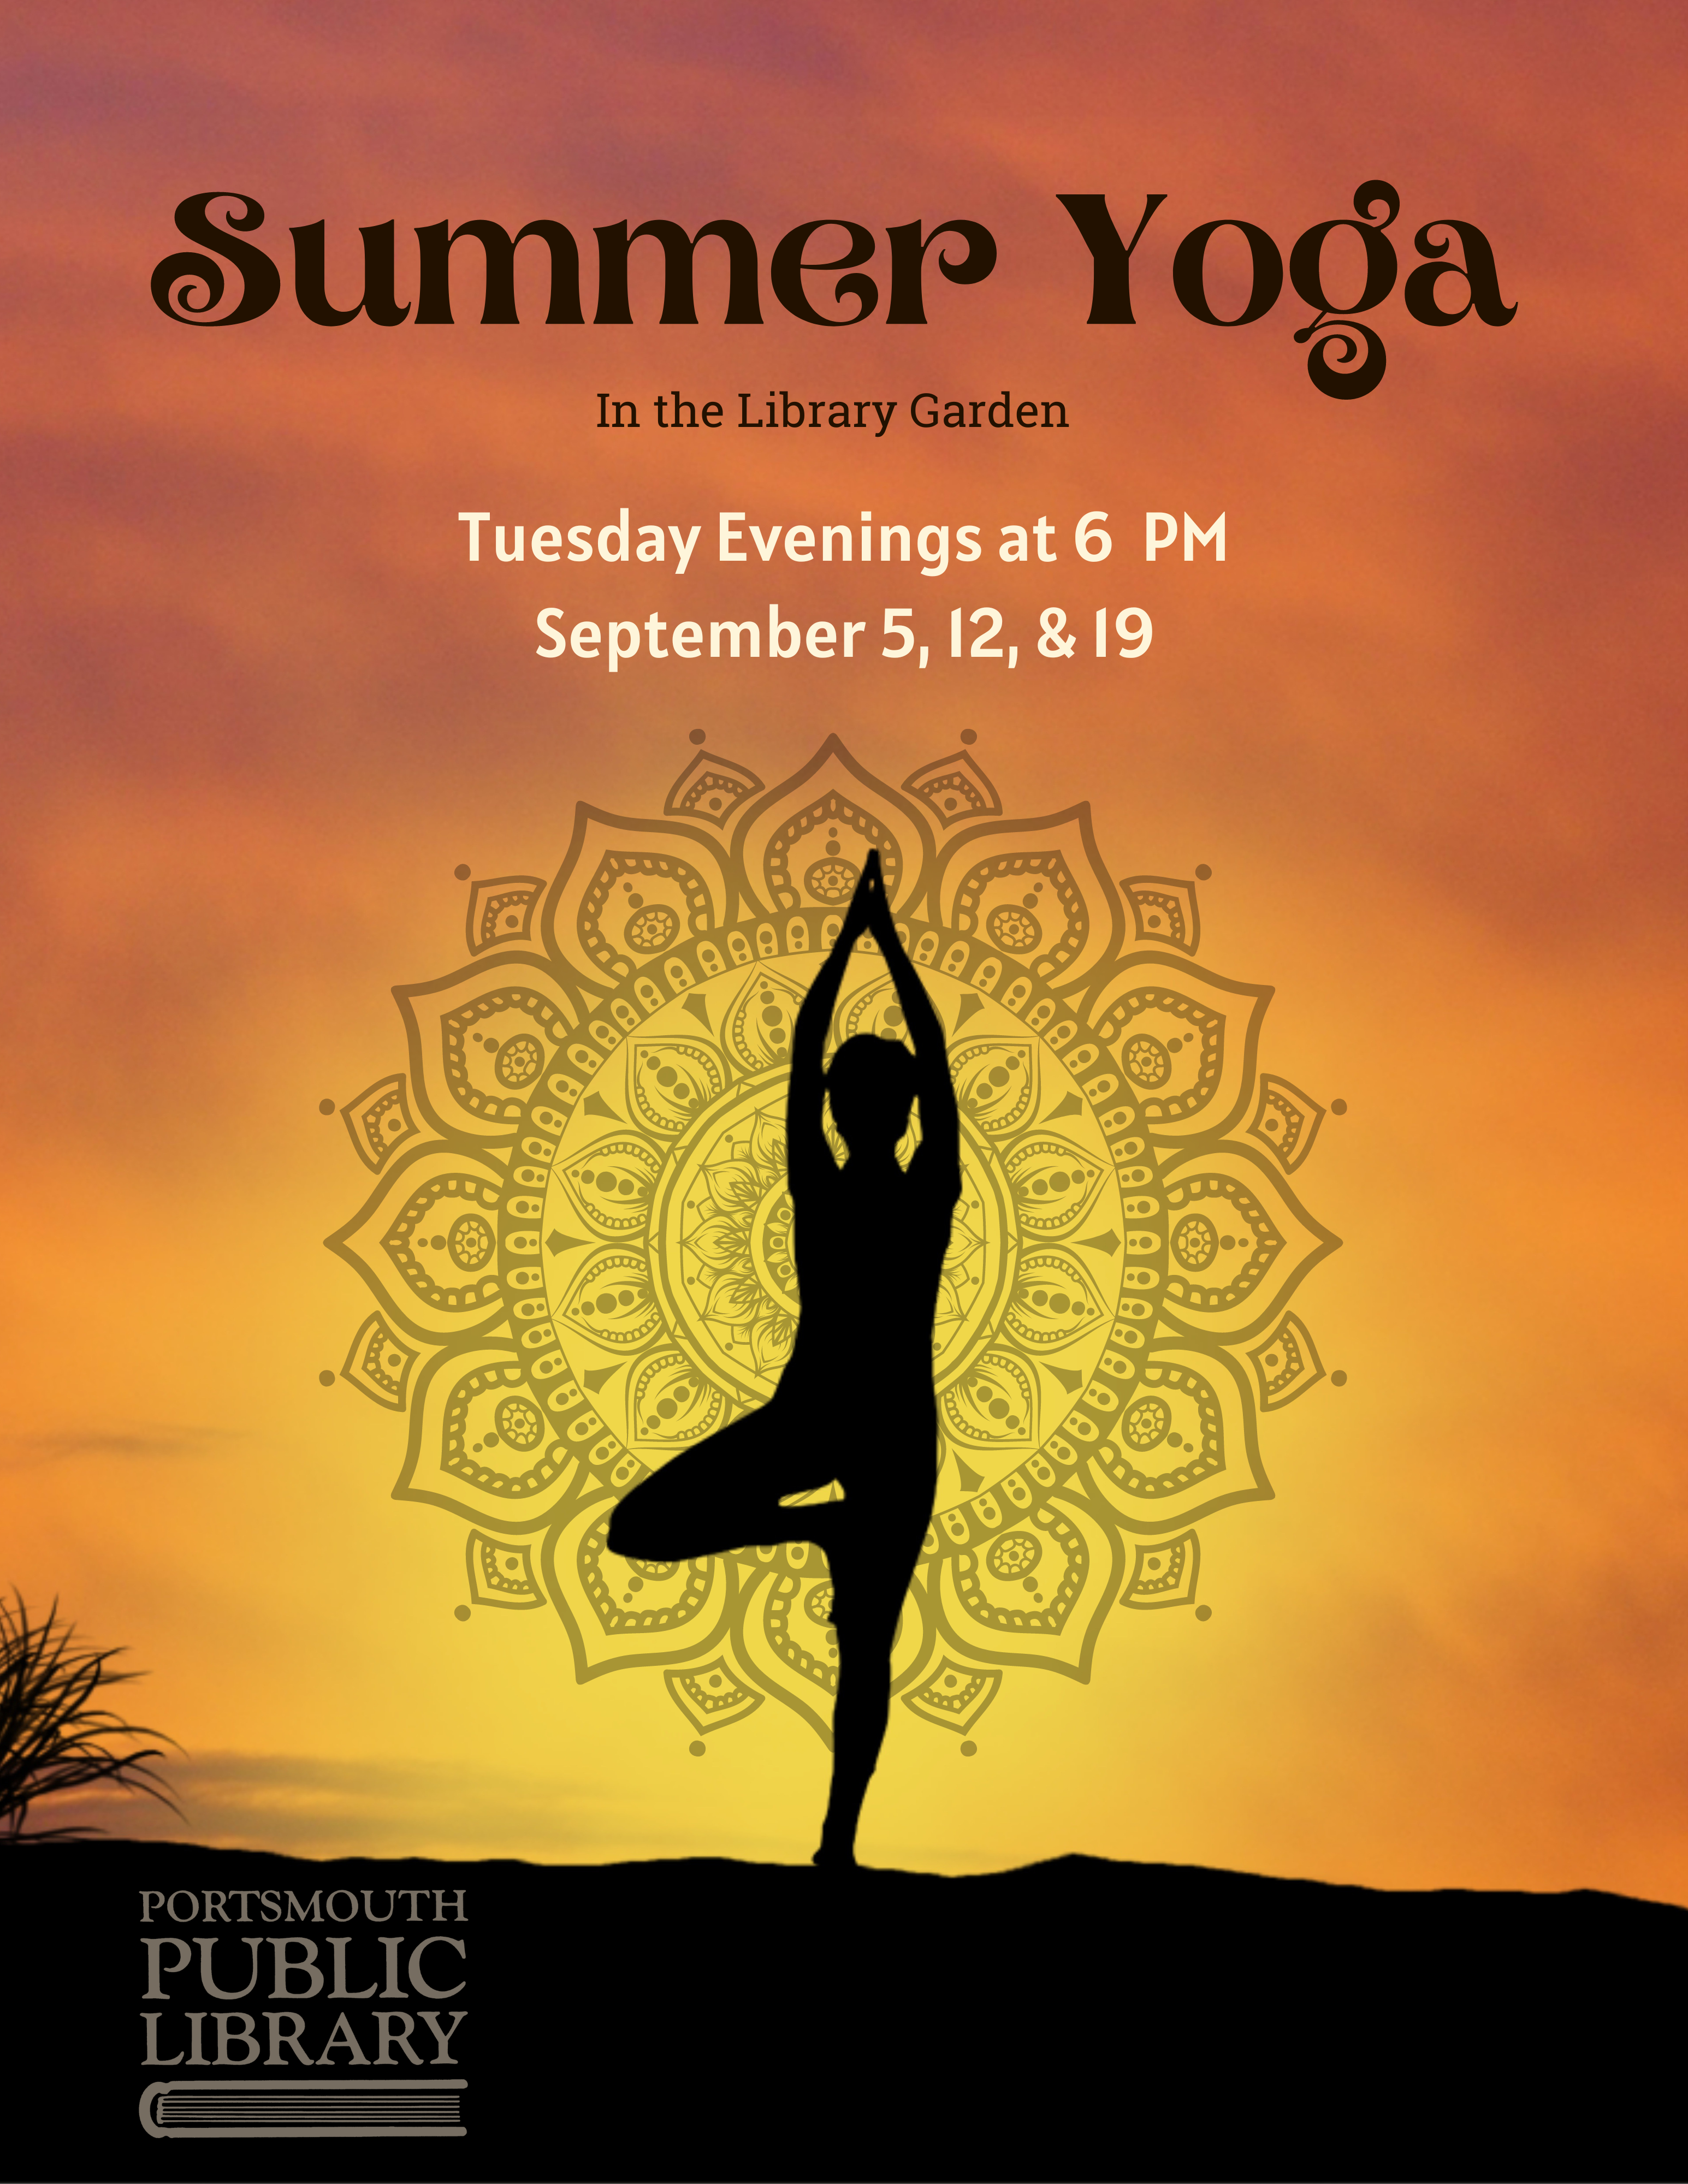 Summer Yoga in the library garden September 5 12 19 at 6 PM Woman standing in yoga pose at sunset